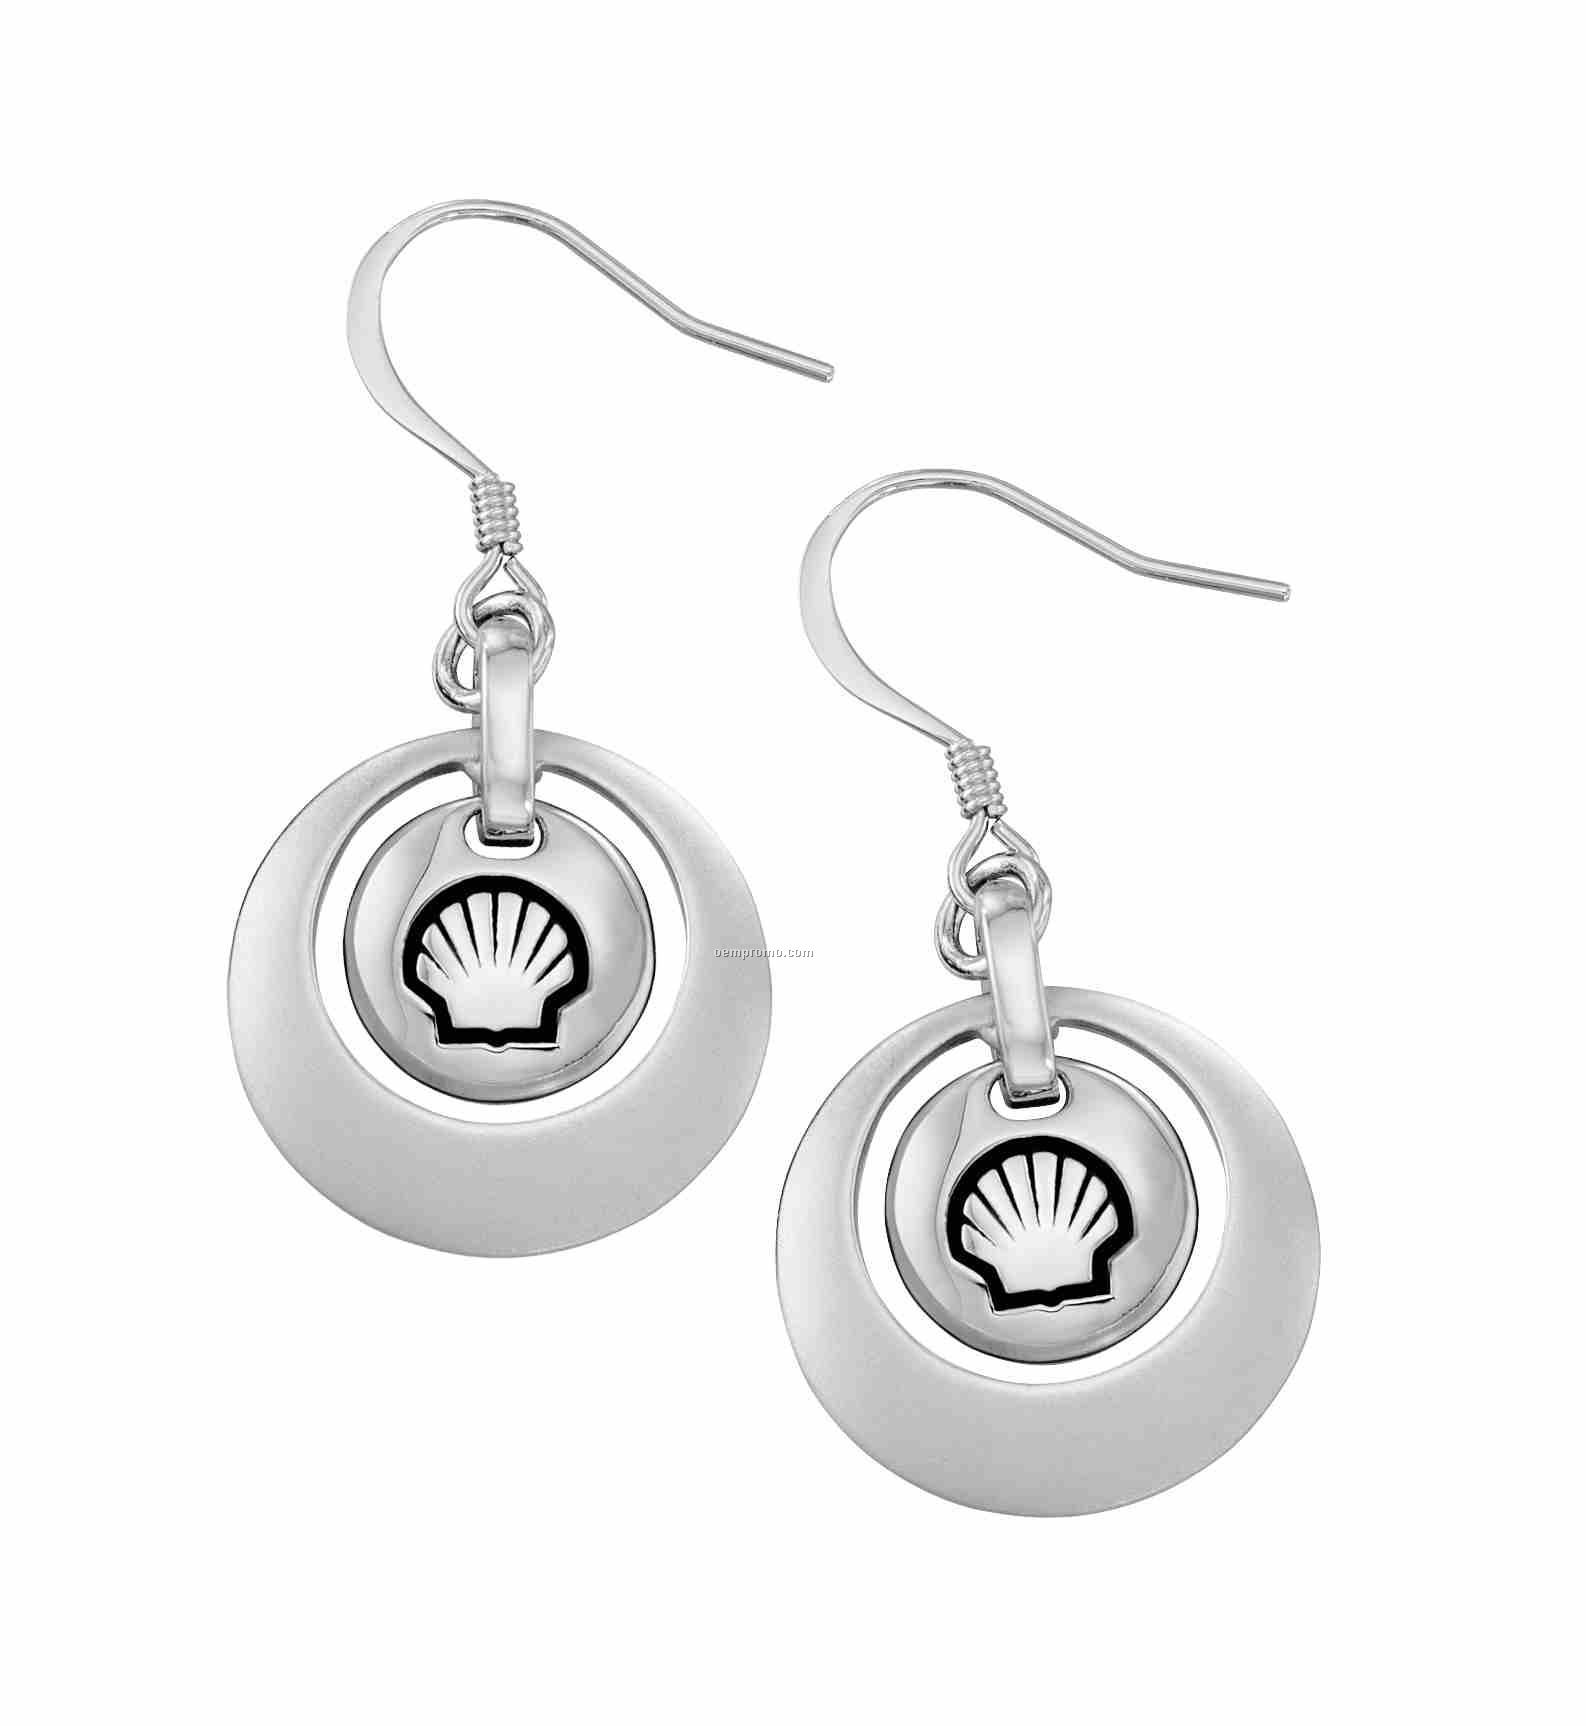 Ovations - Accolade Collection Silver Plated Earrings